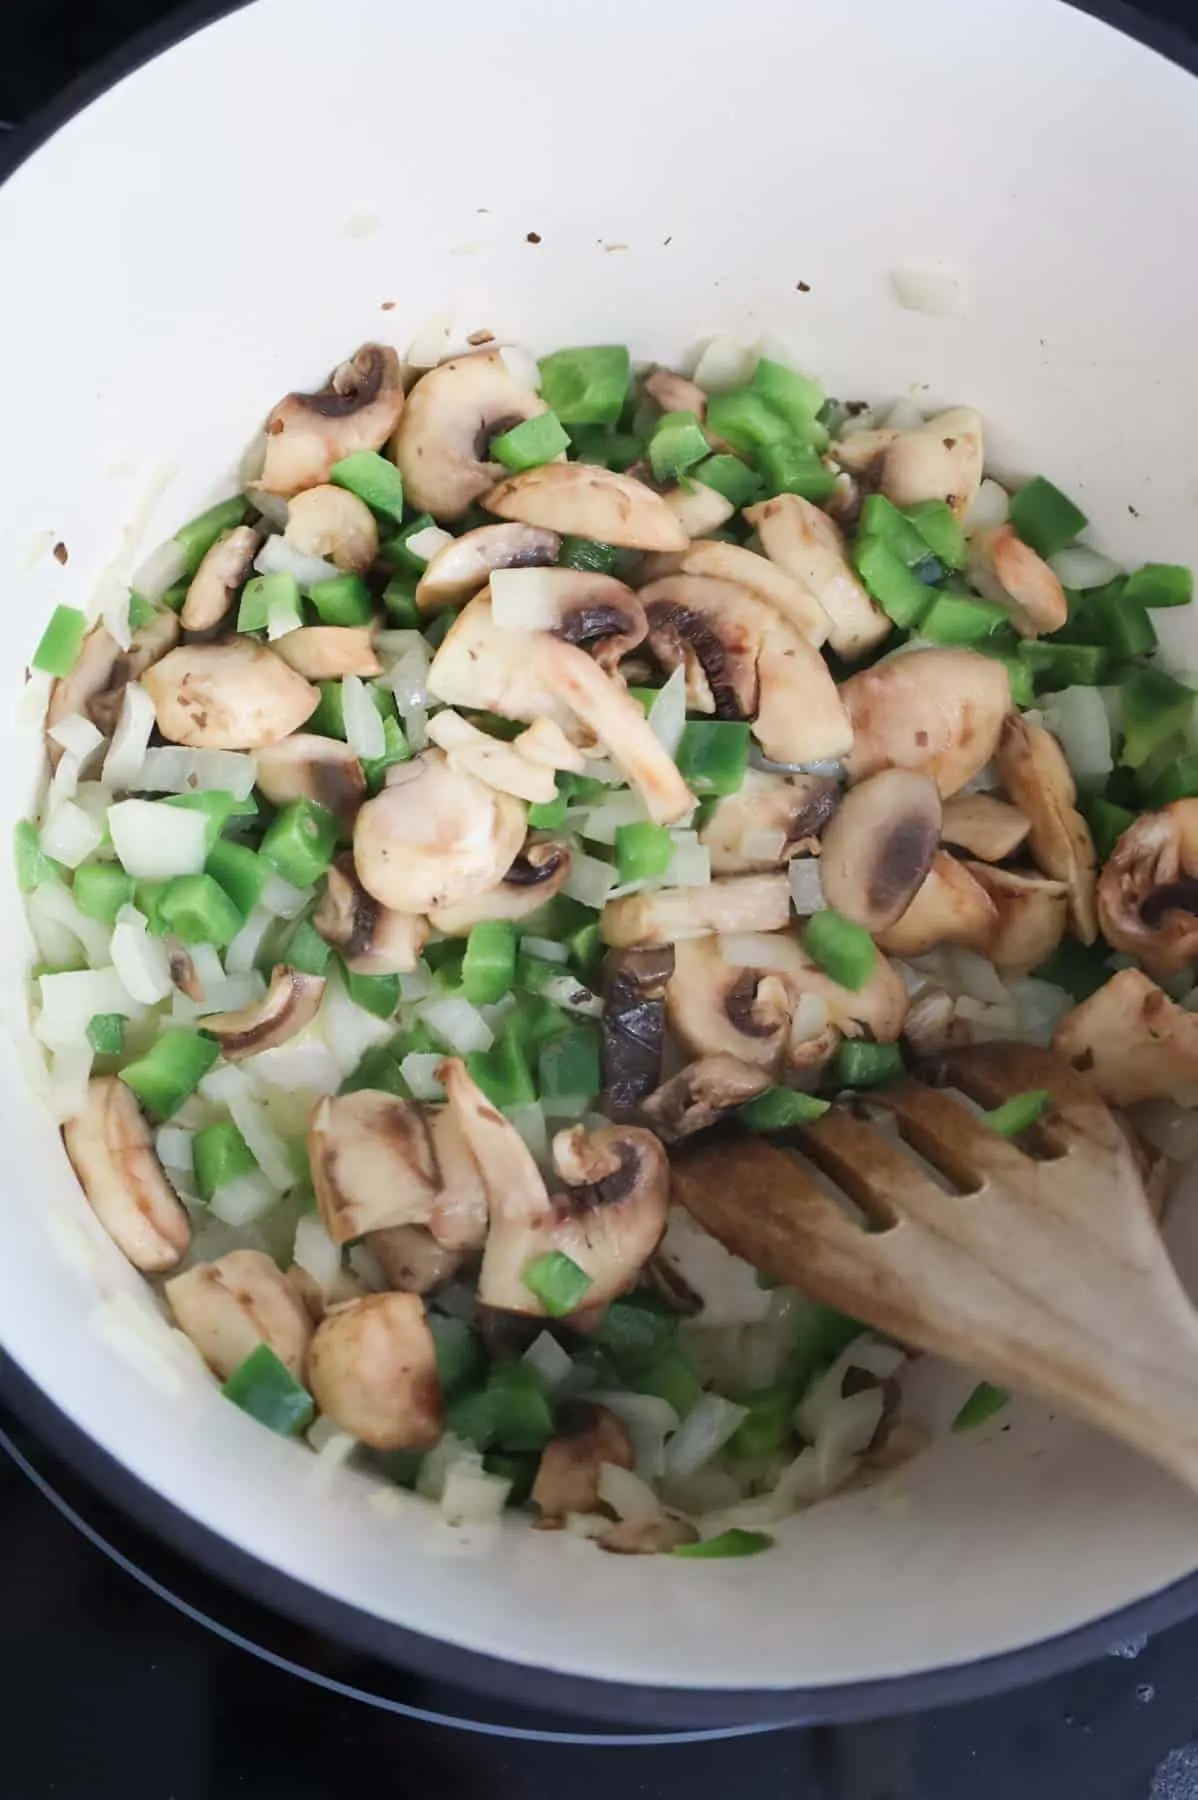 onions, green peppers and mushrooms cooking in a pot